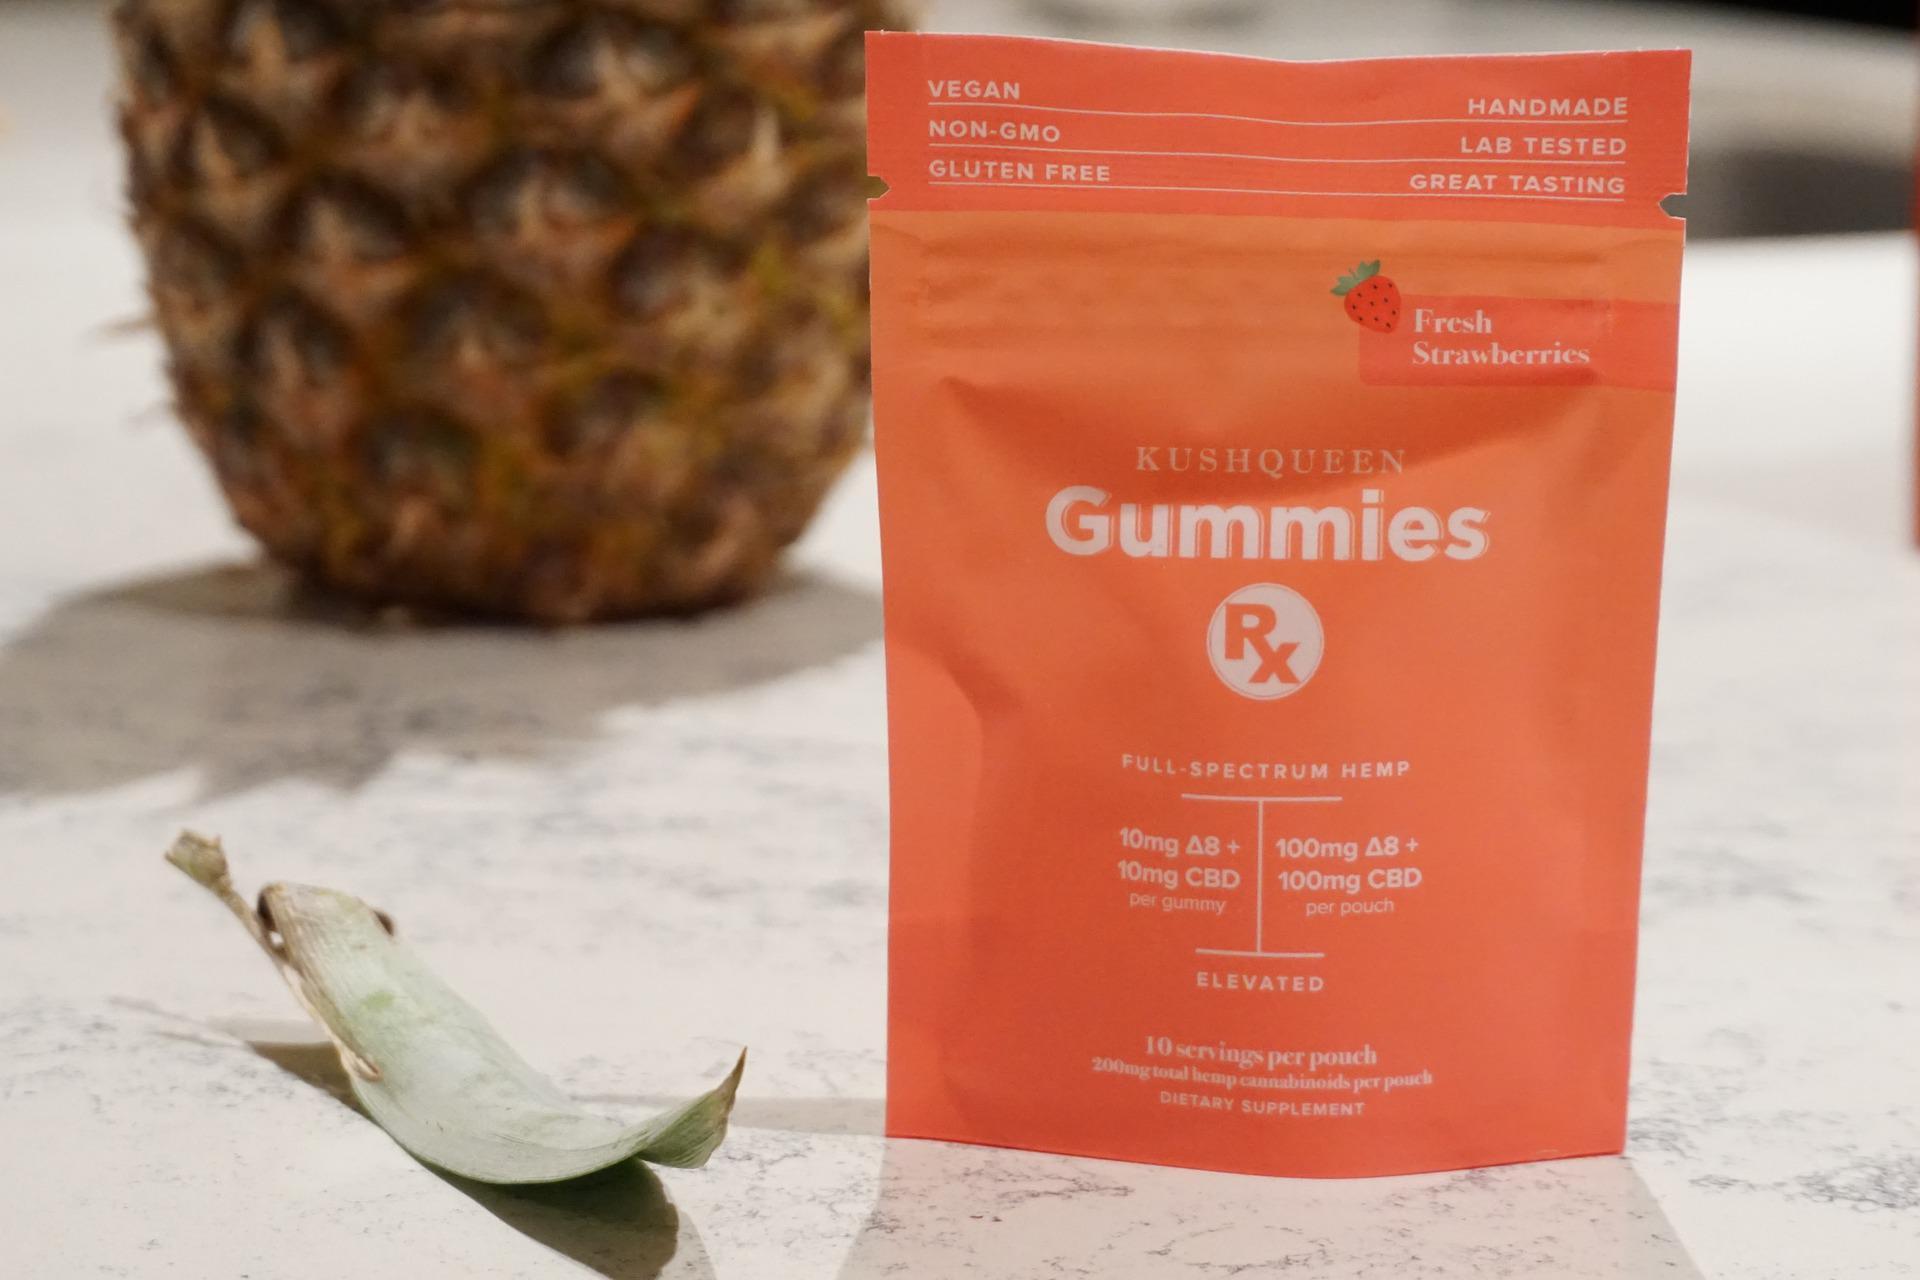 Is the delta 9 gummies are safe to use